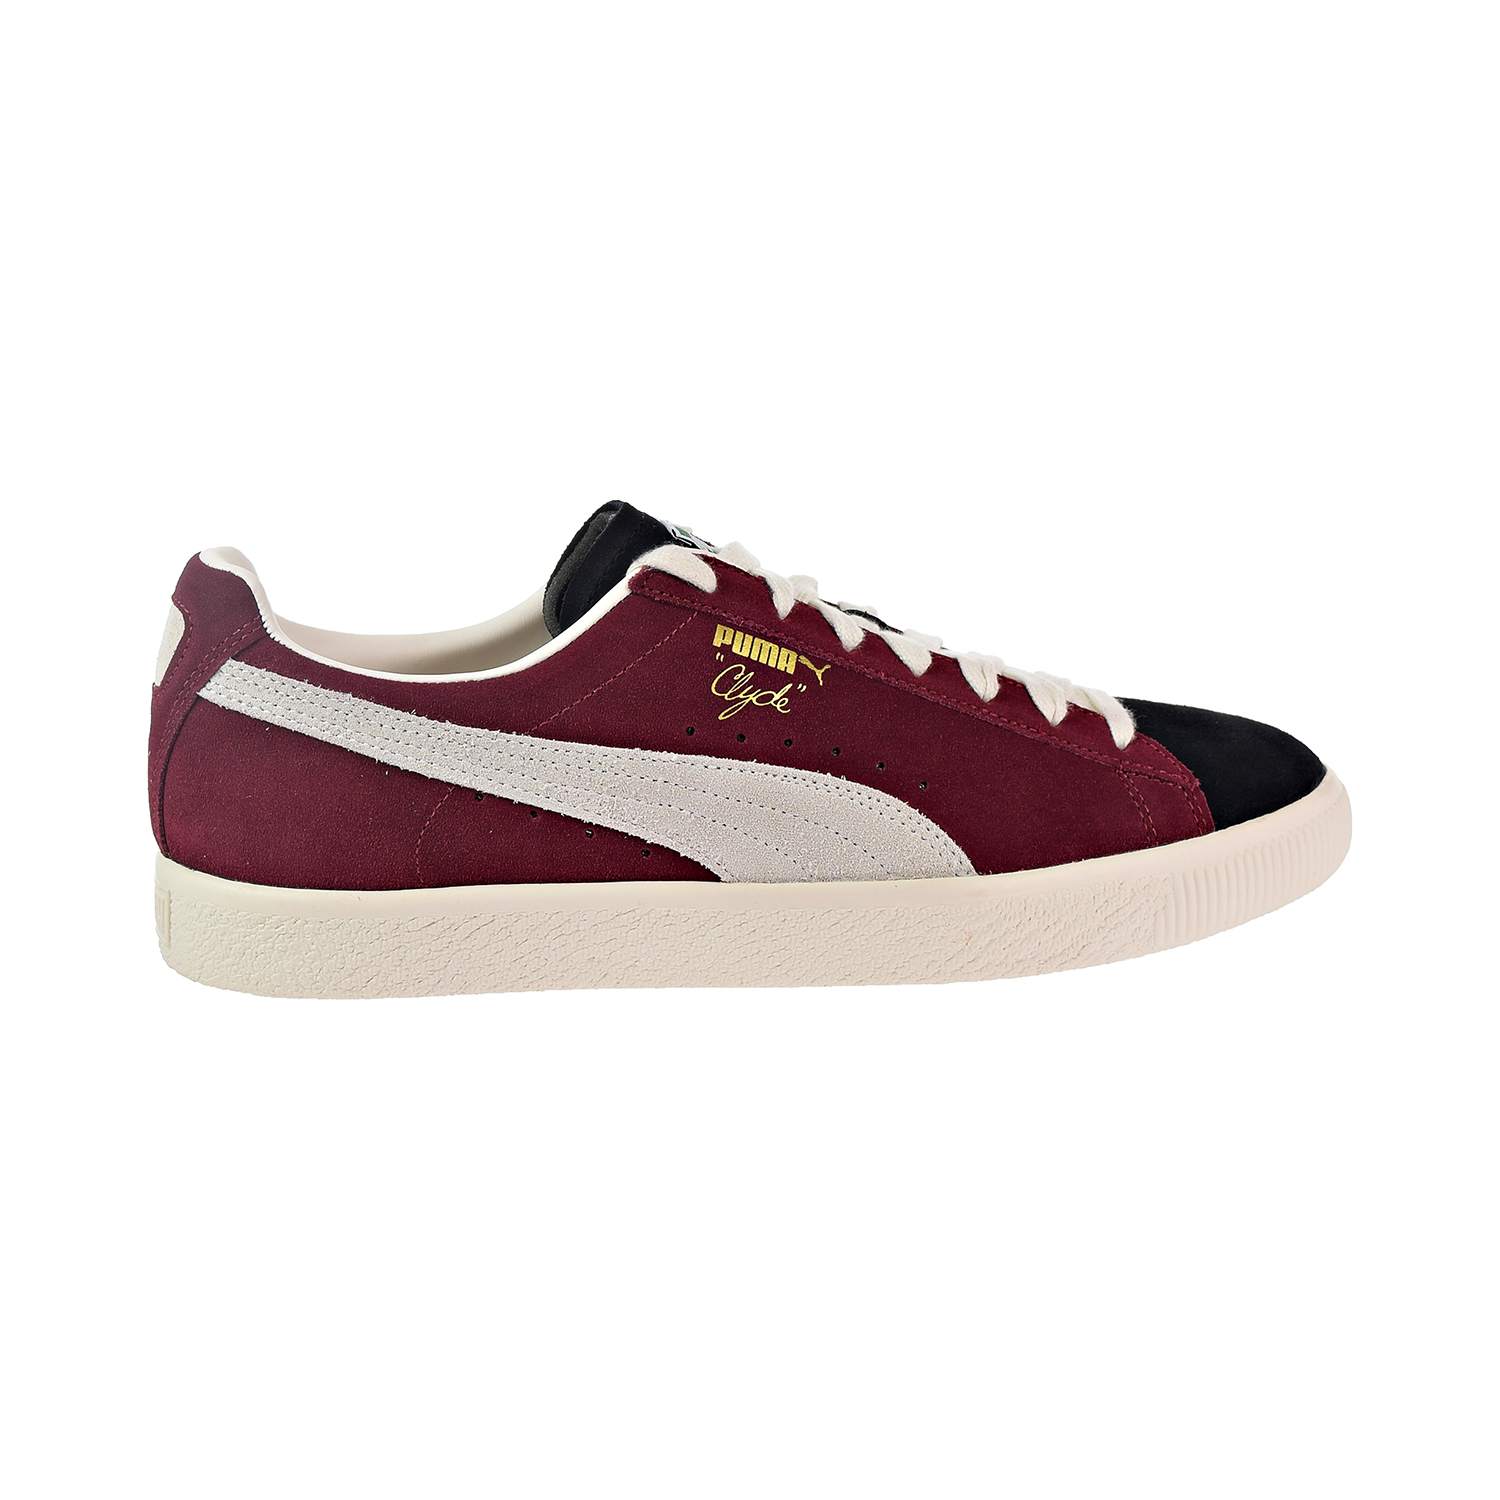 Puma Clyde From The Archive Men's Shoes 